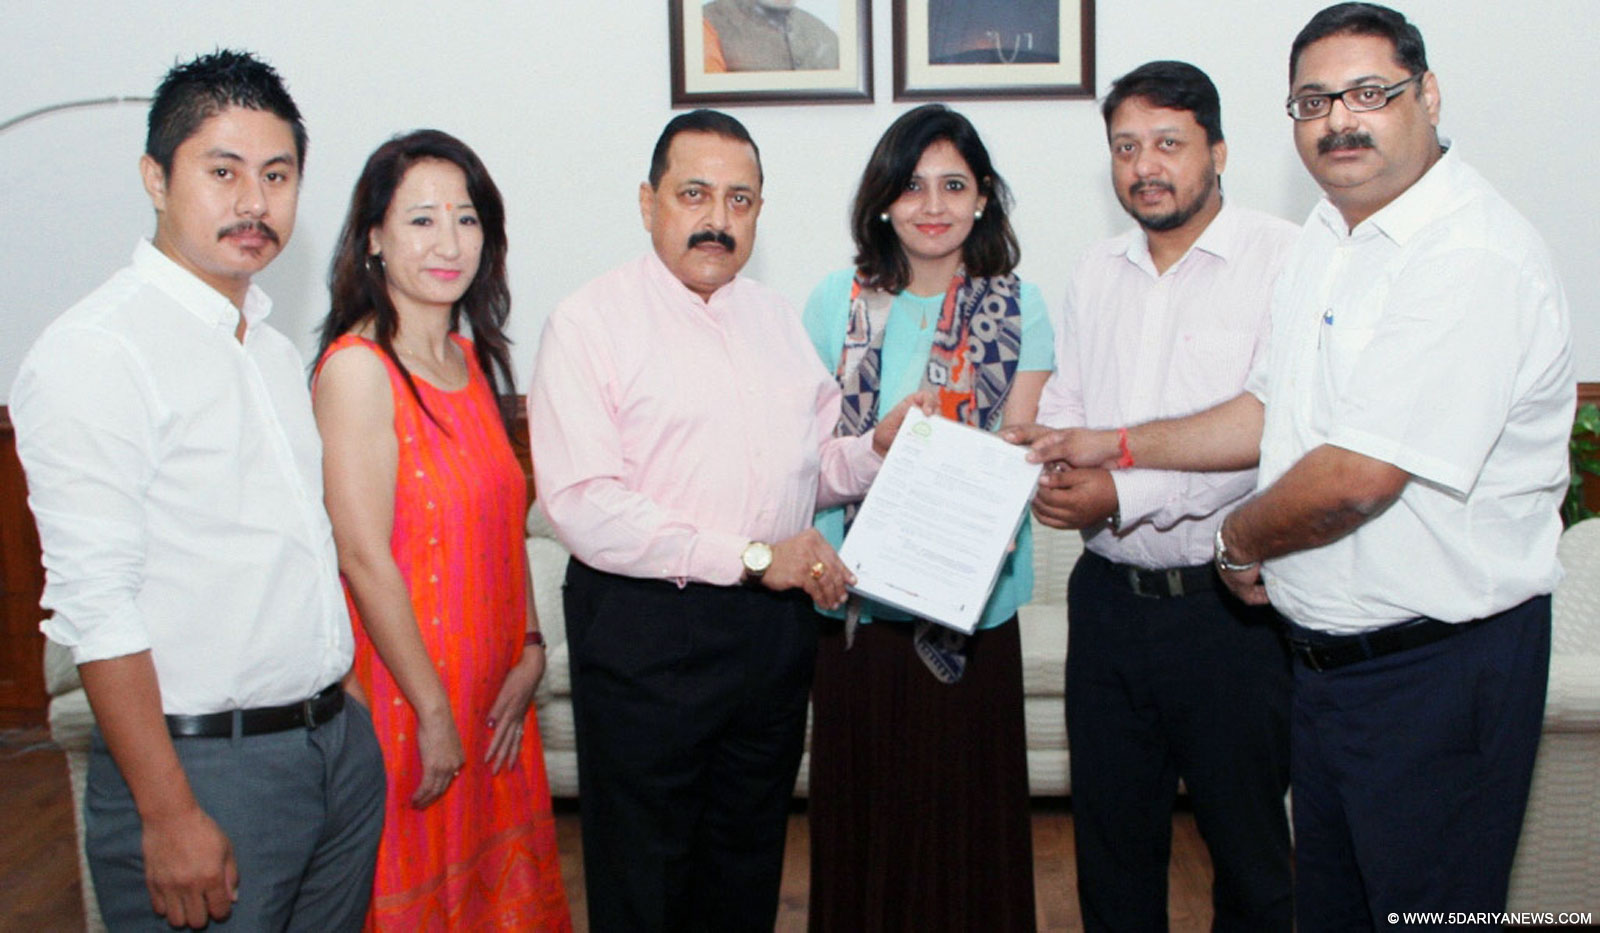 Dr. Jitendra Singh receiving the Programme book of Northeast Festival at Bengaluru by representatives of “Northeast India Welfare Society”, in New Delhi on September 26, 2015. 